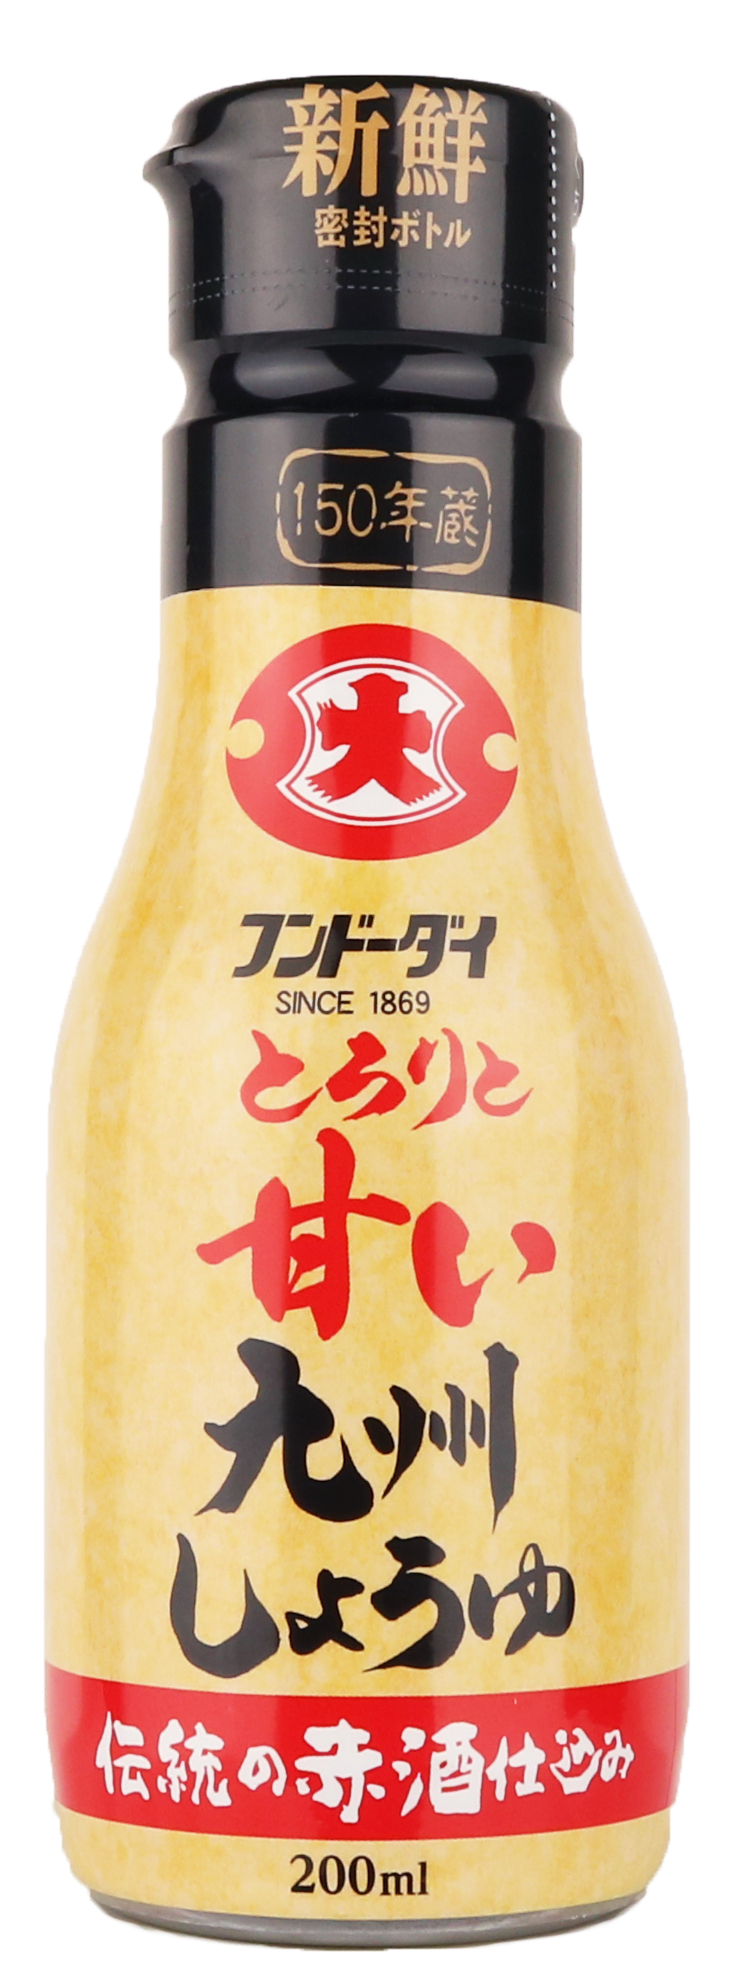 Thick and sweet Kyushu Soy Sauce 200ml Sealed Bottle